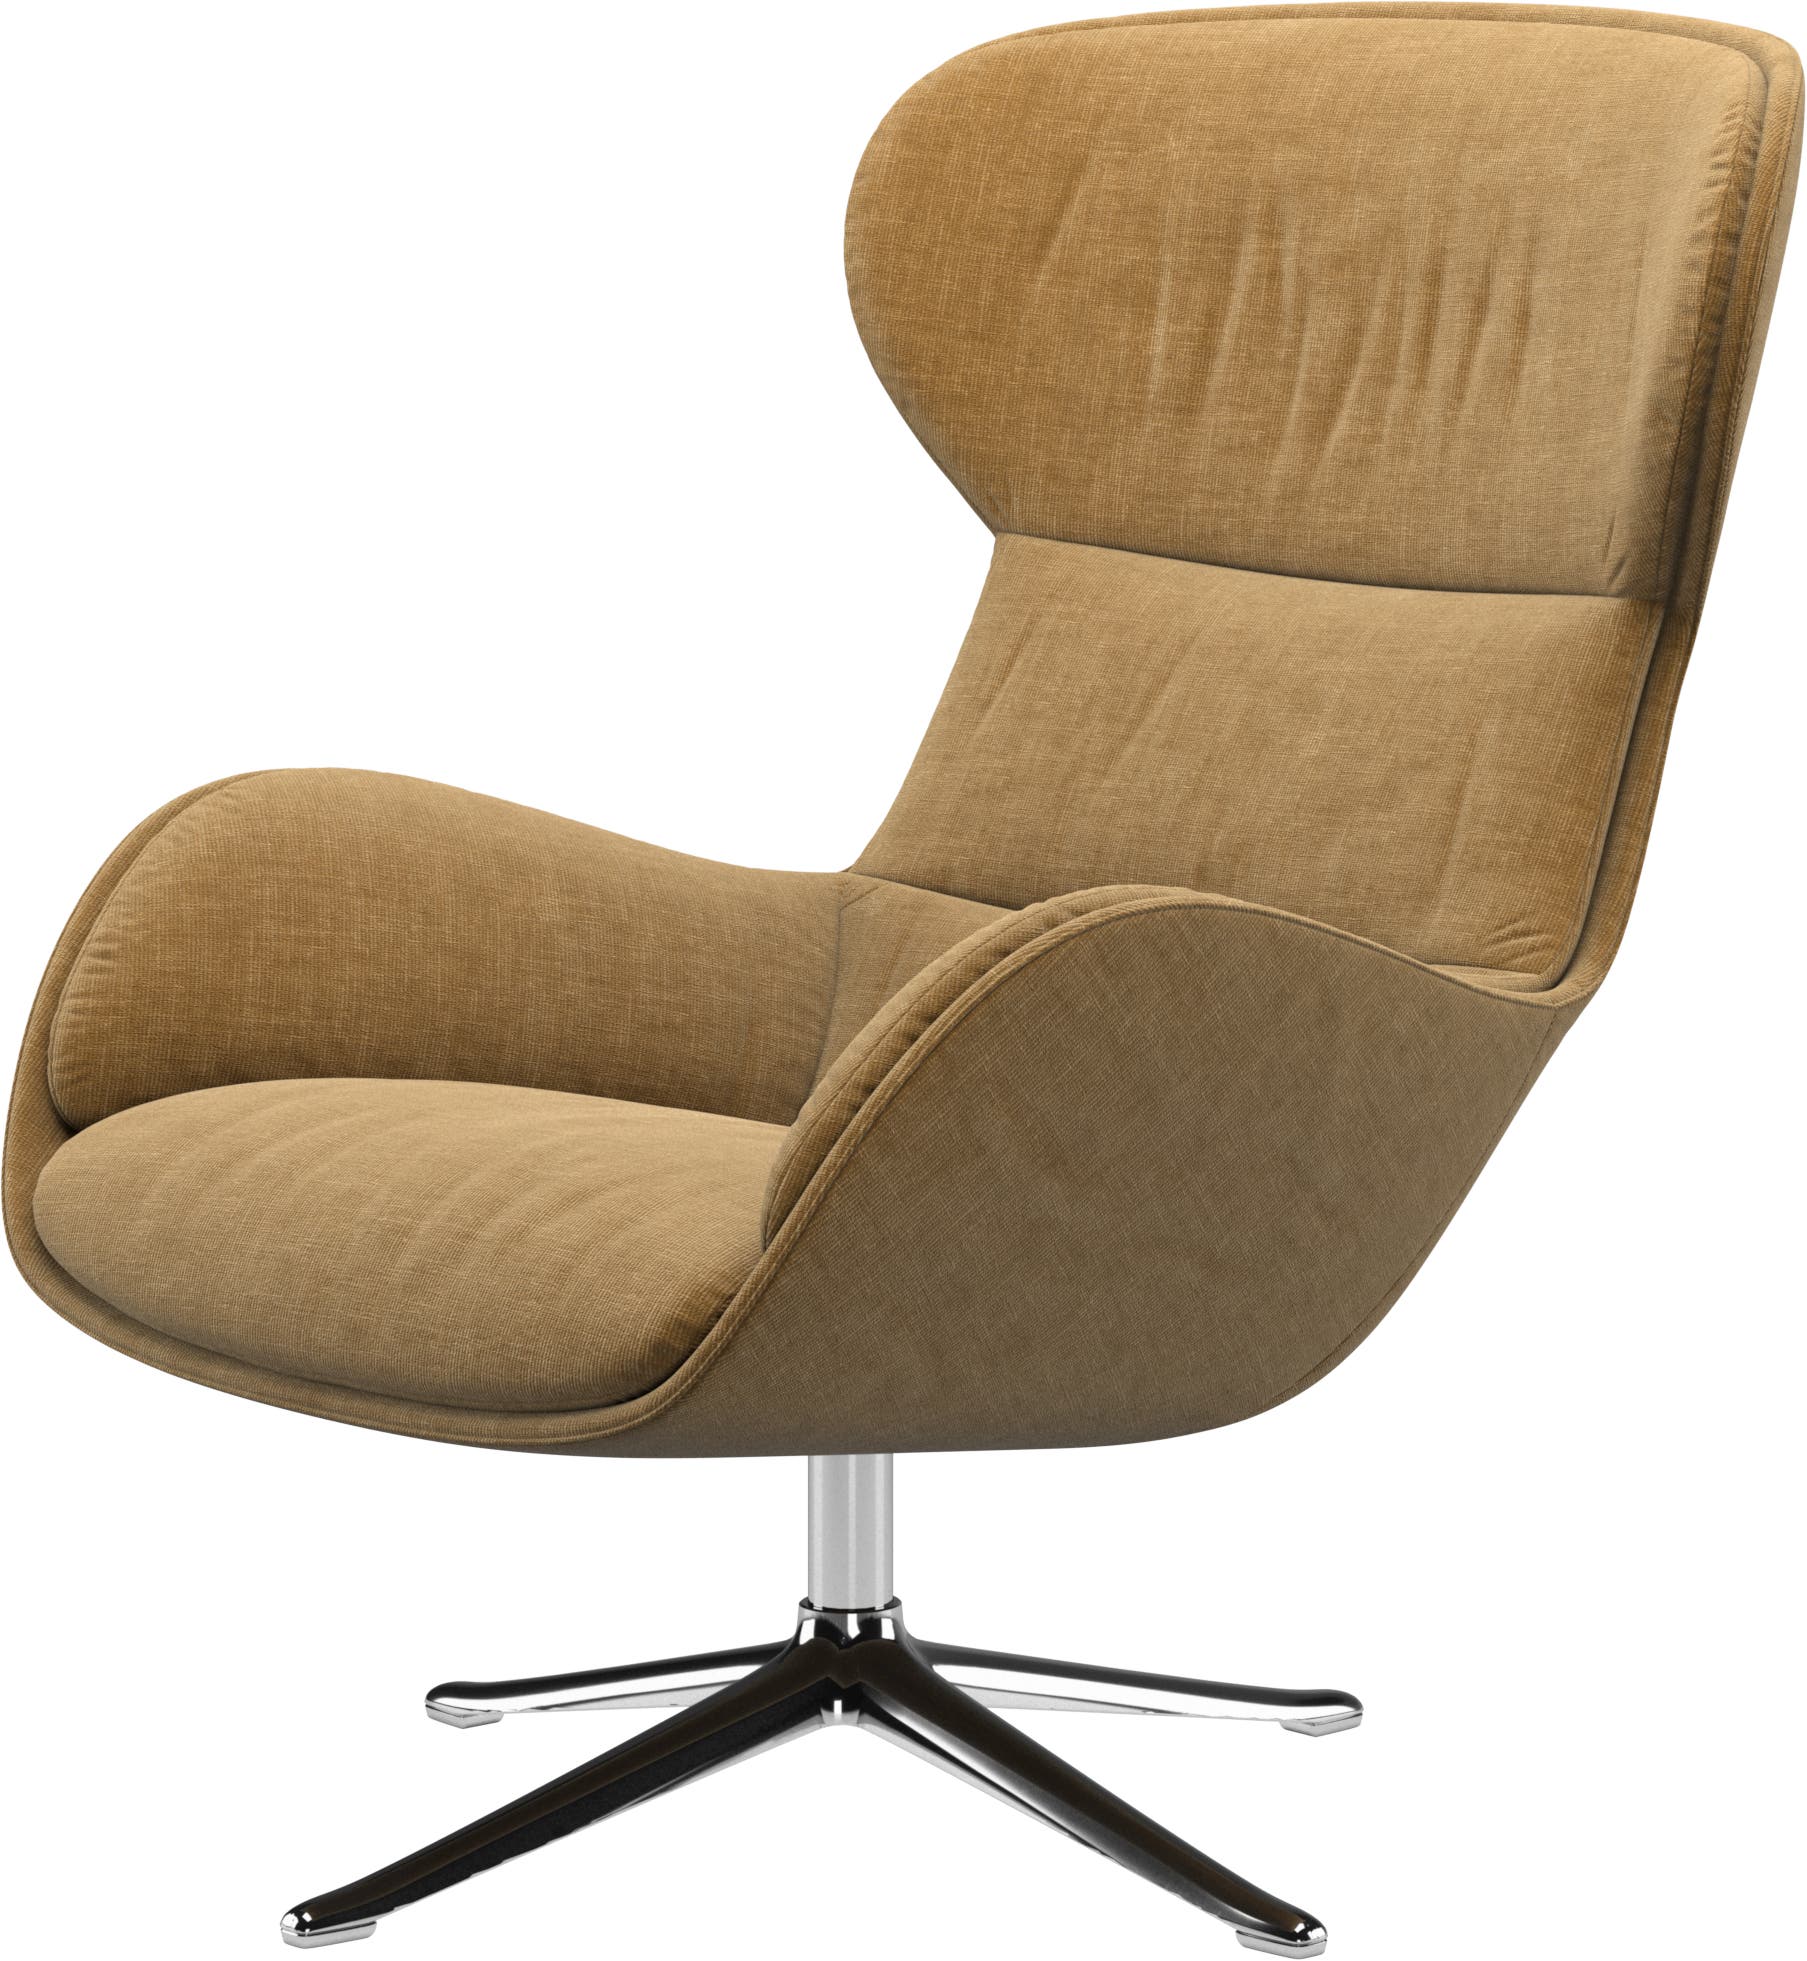 Reno chair with swivel function